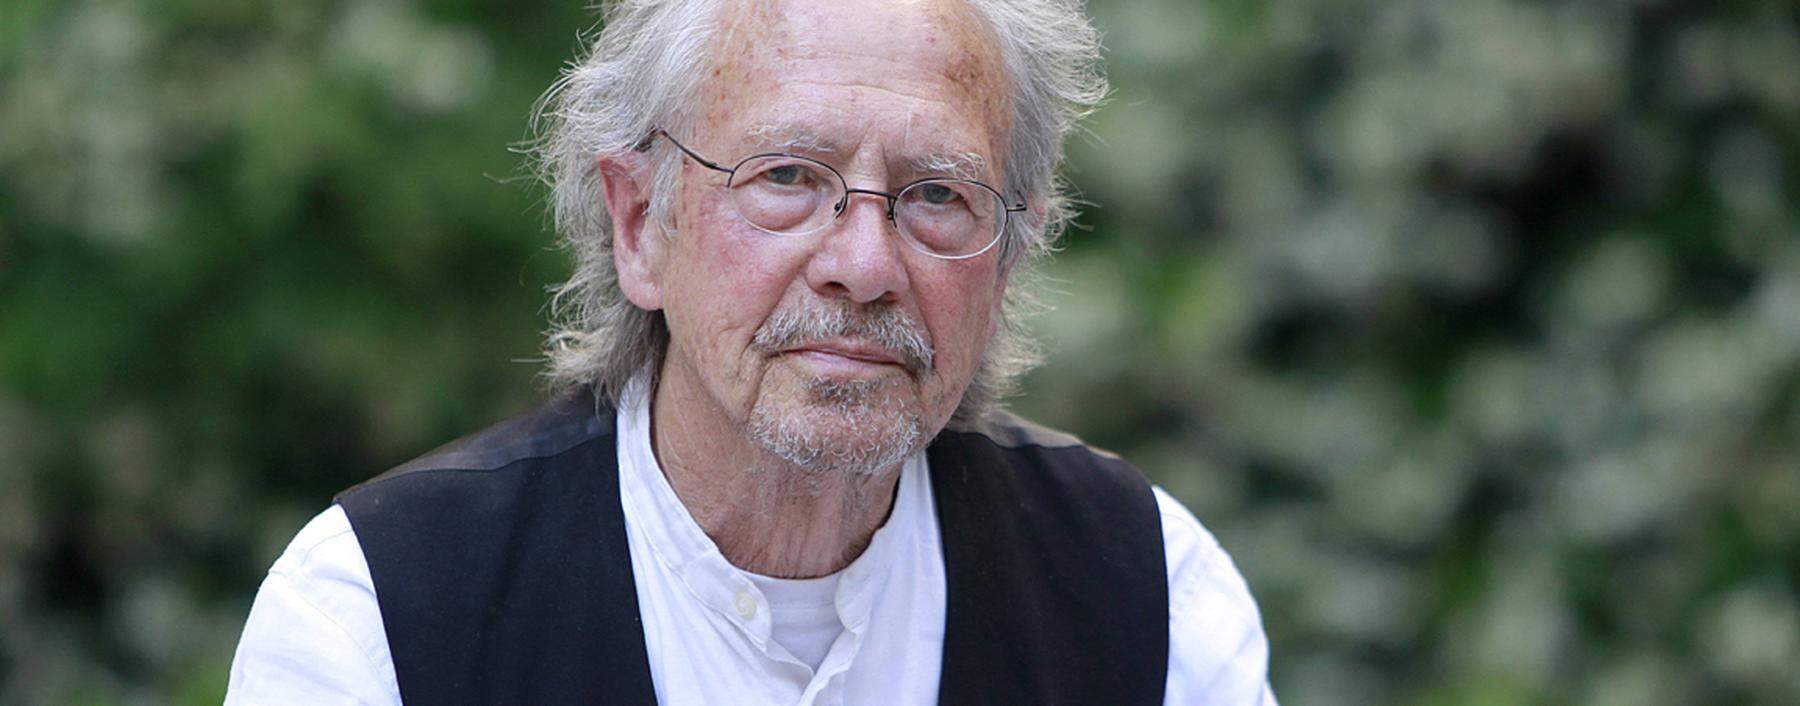 German writer Peter Handke poses for the media during an interview held in Madrid Spain on 22 May 2